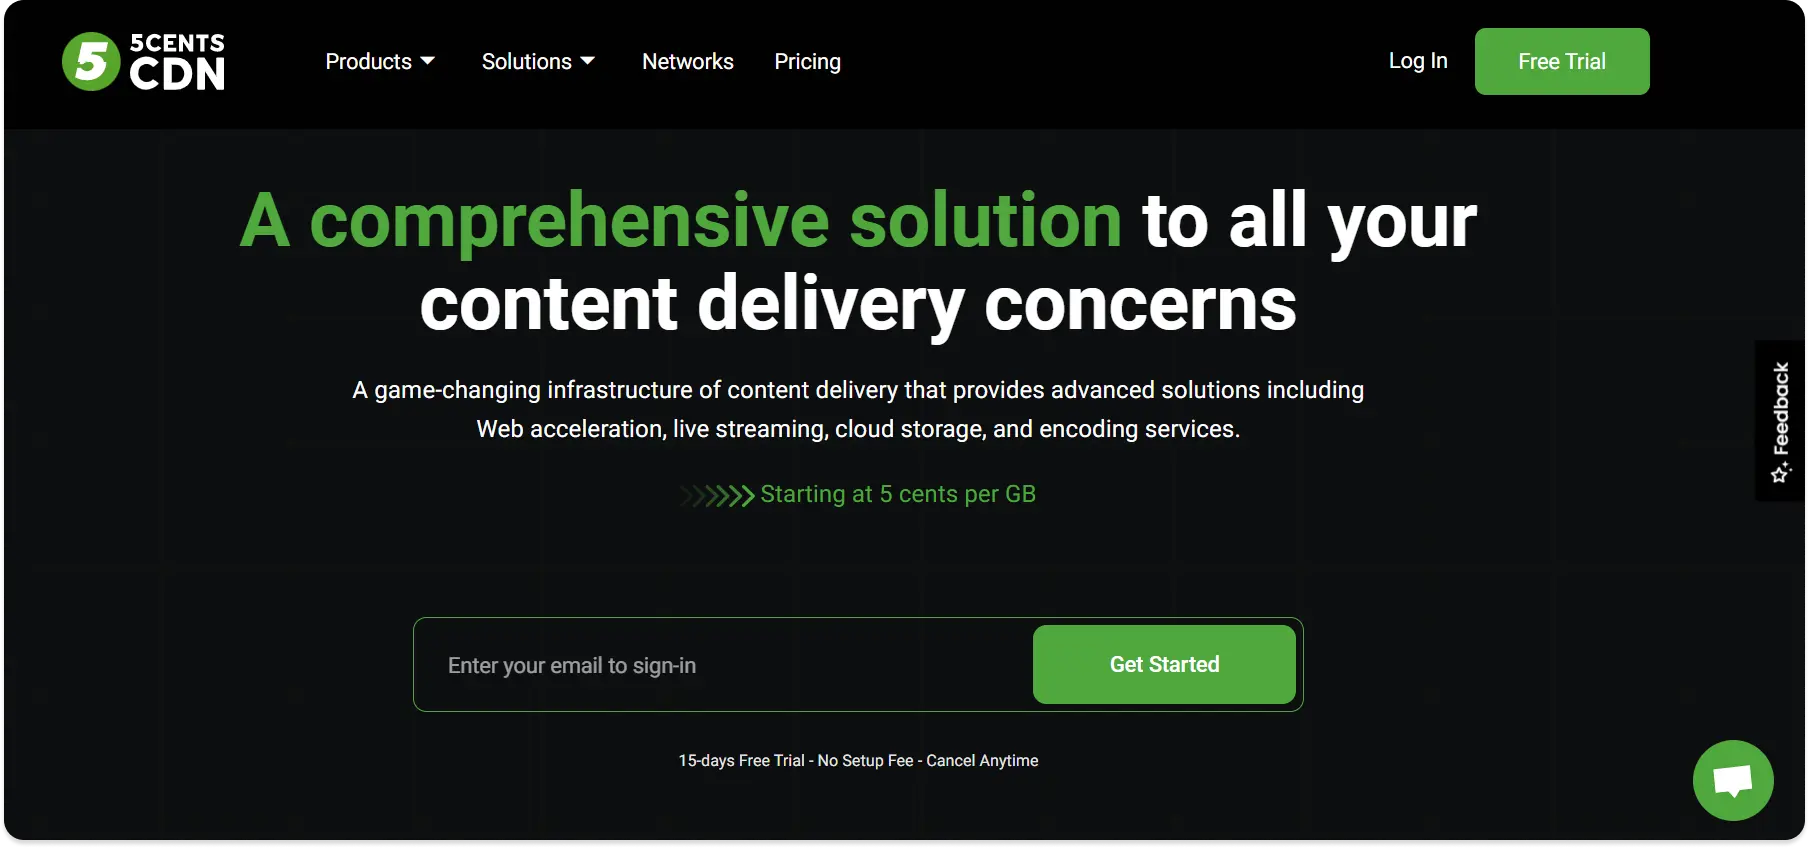 5centsCDN (Content Delivery Network Solution)